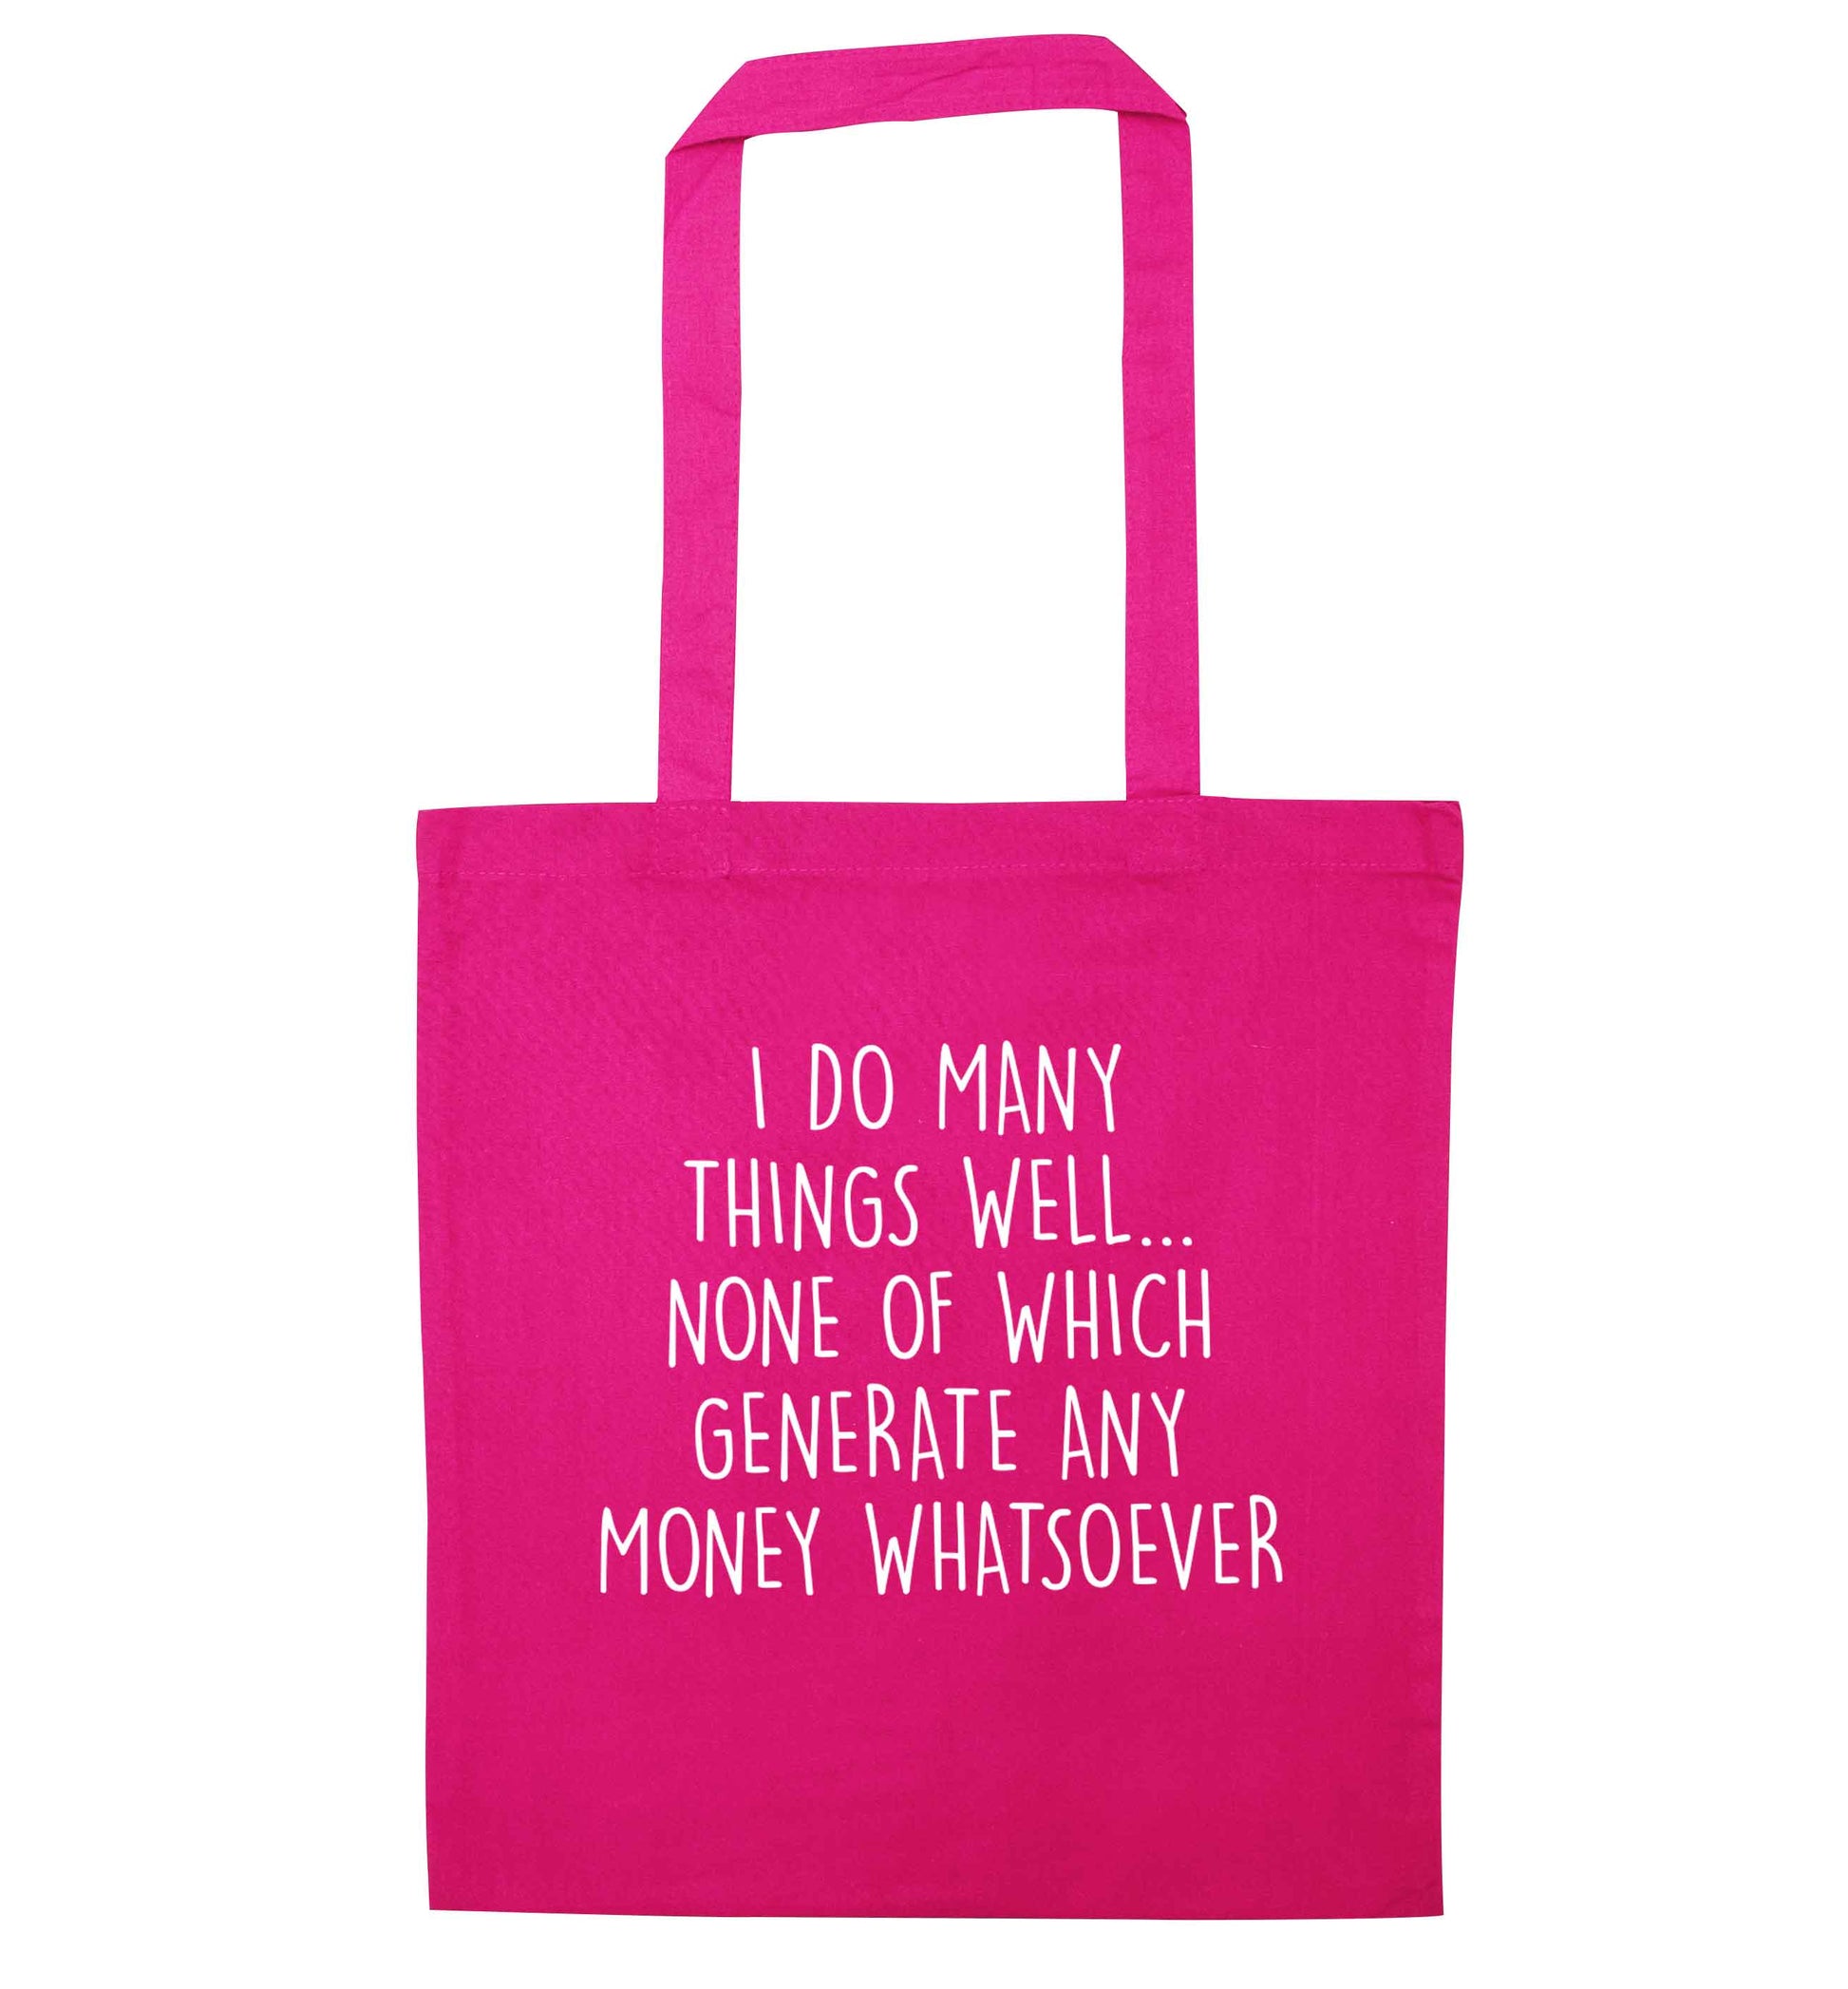 I do many things well none of which generate income pink tote bag